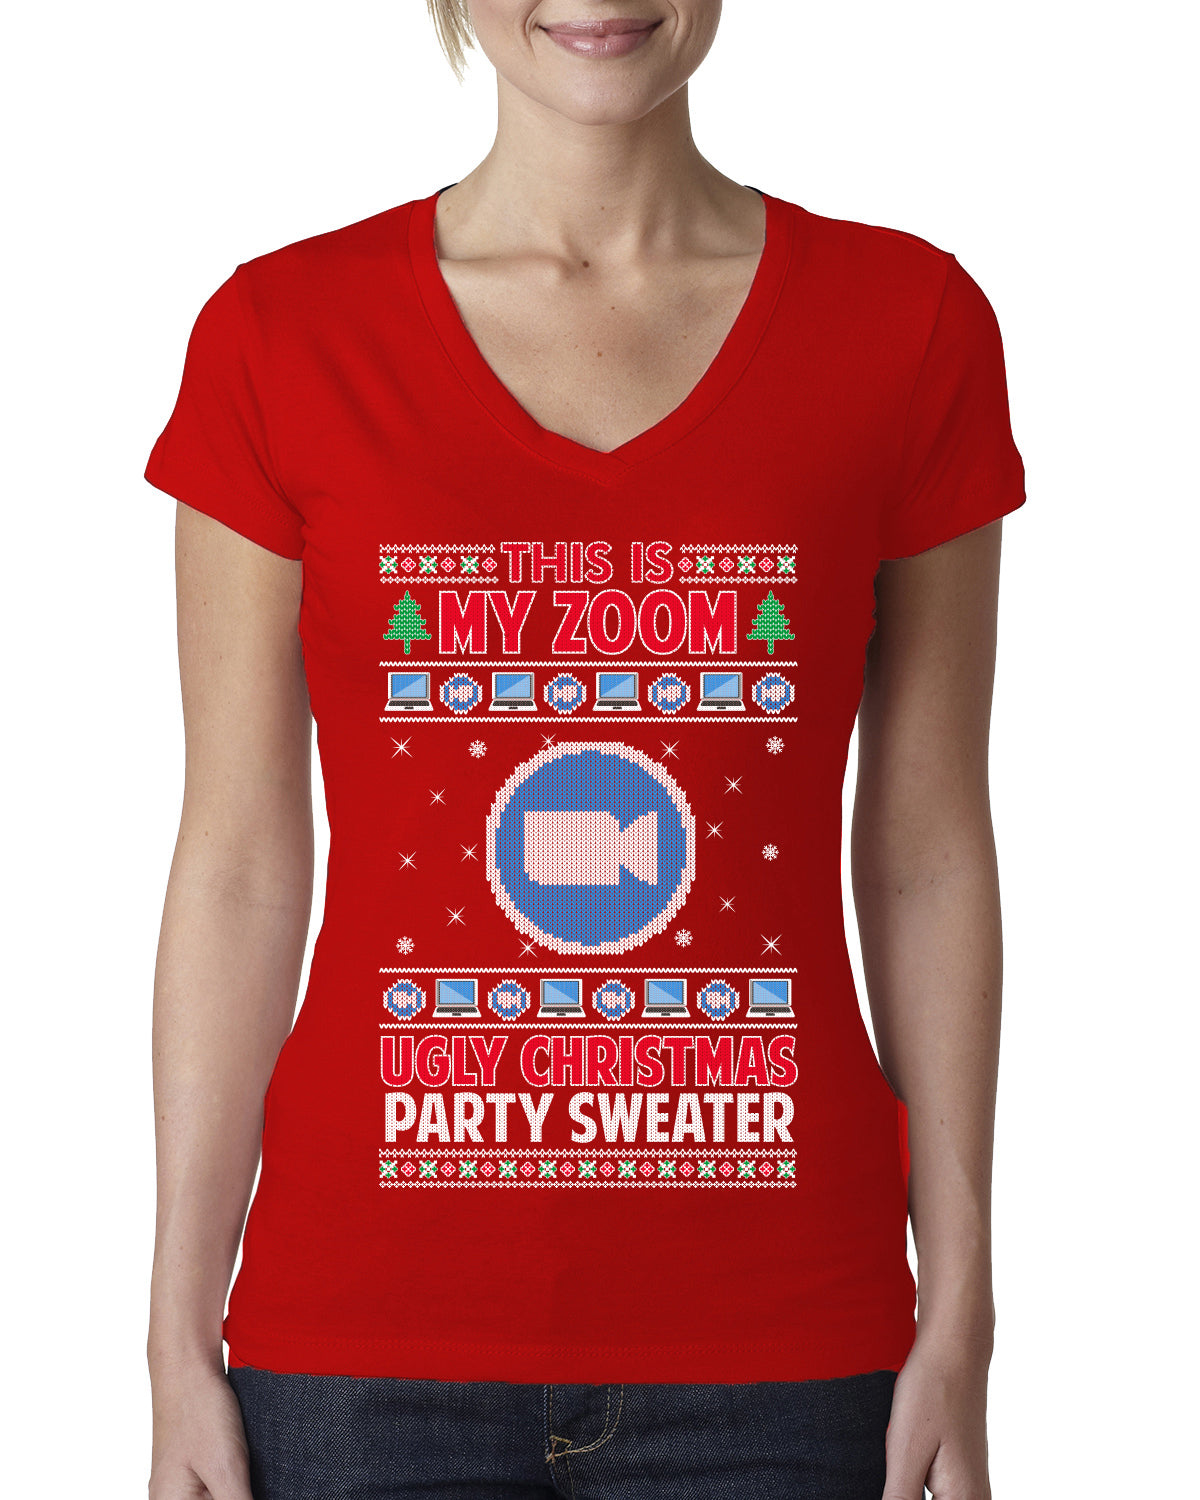 This Is My Zoom Ugly Christmas Party Sweater Ugly Christmas Sweater Womens Junior Fit V-Neck Tee